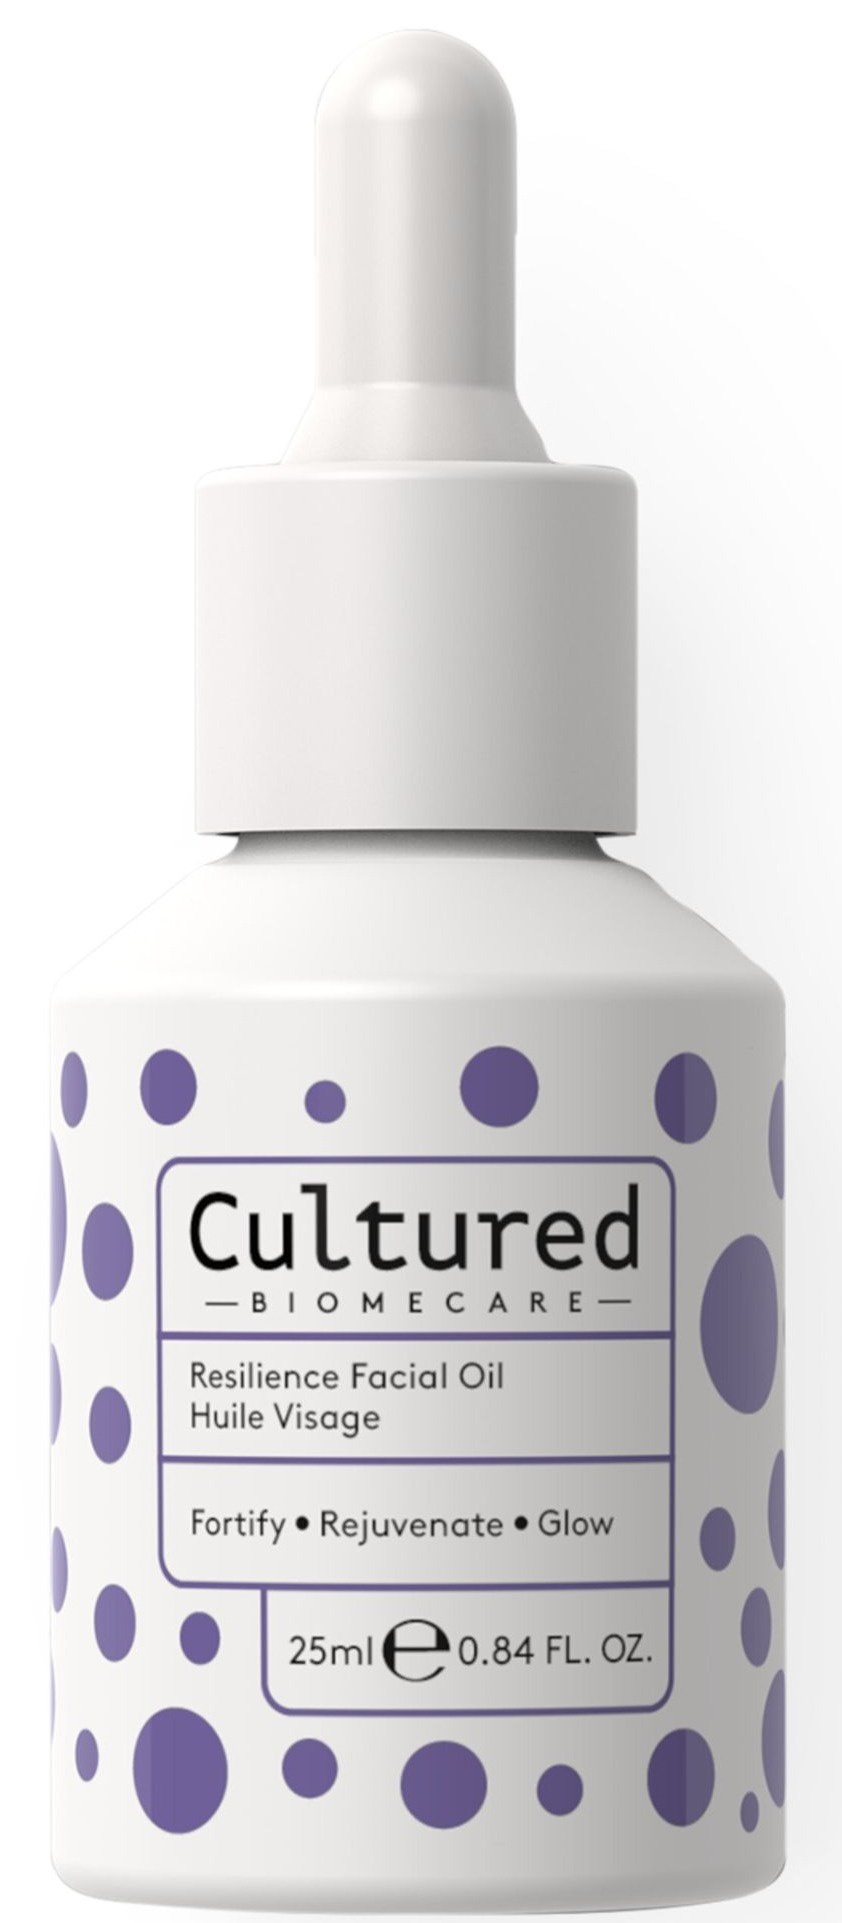 Cultured Recilience Facial Oil